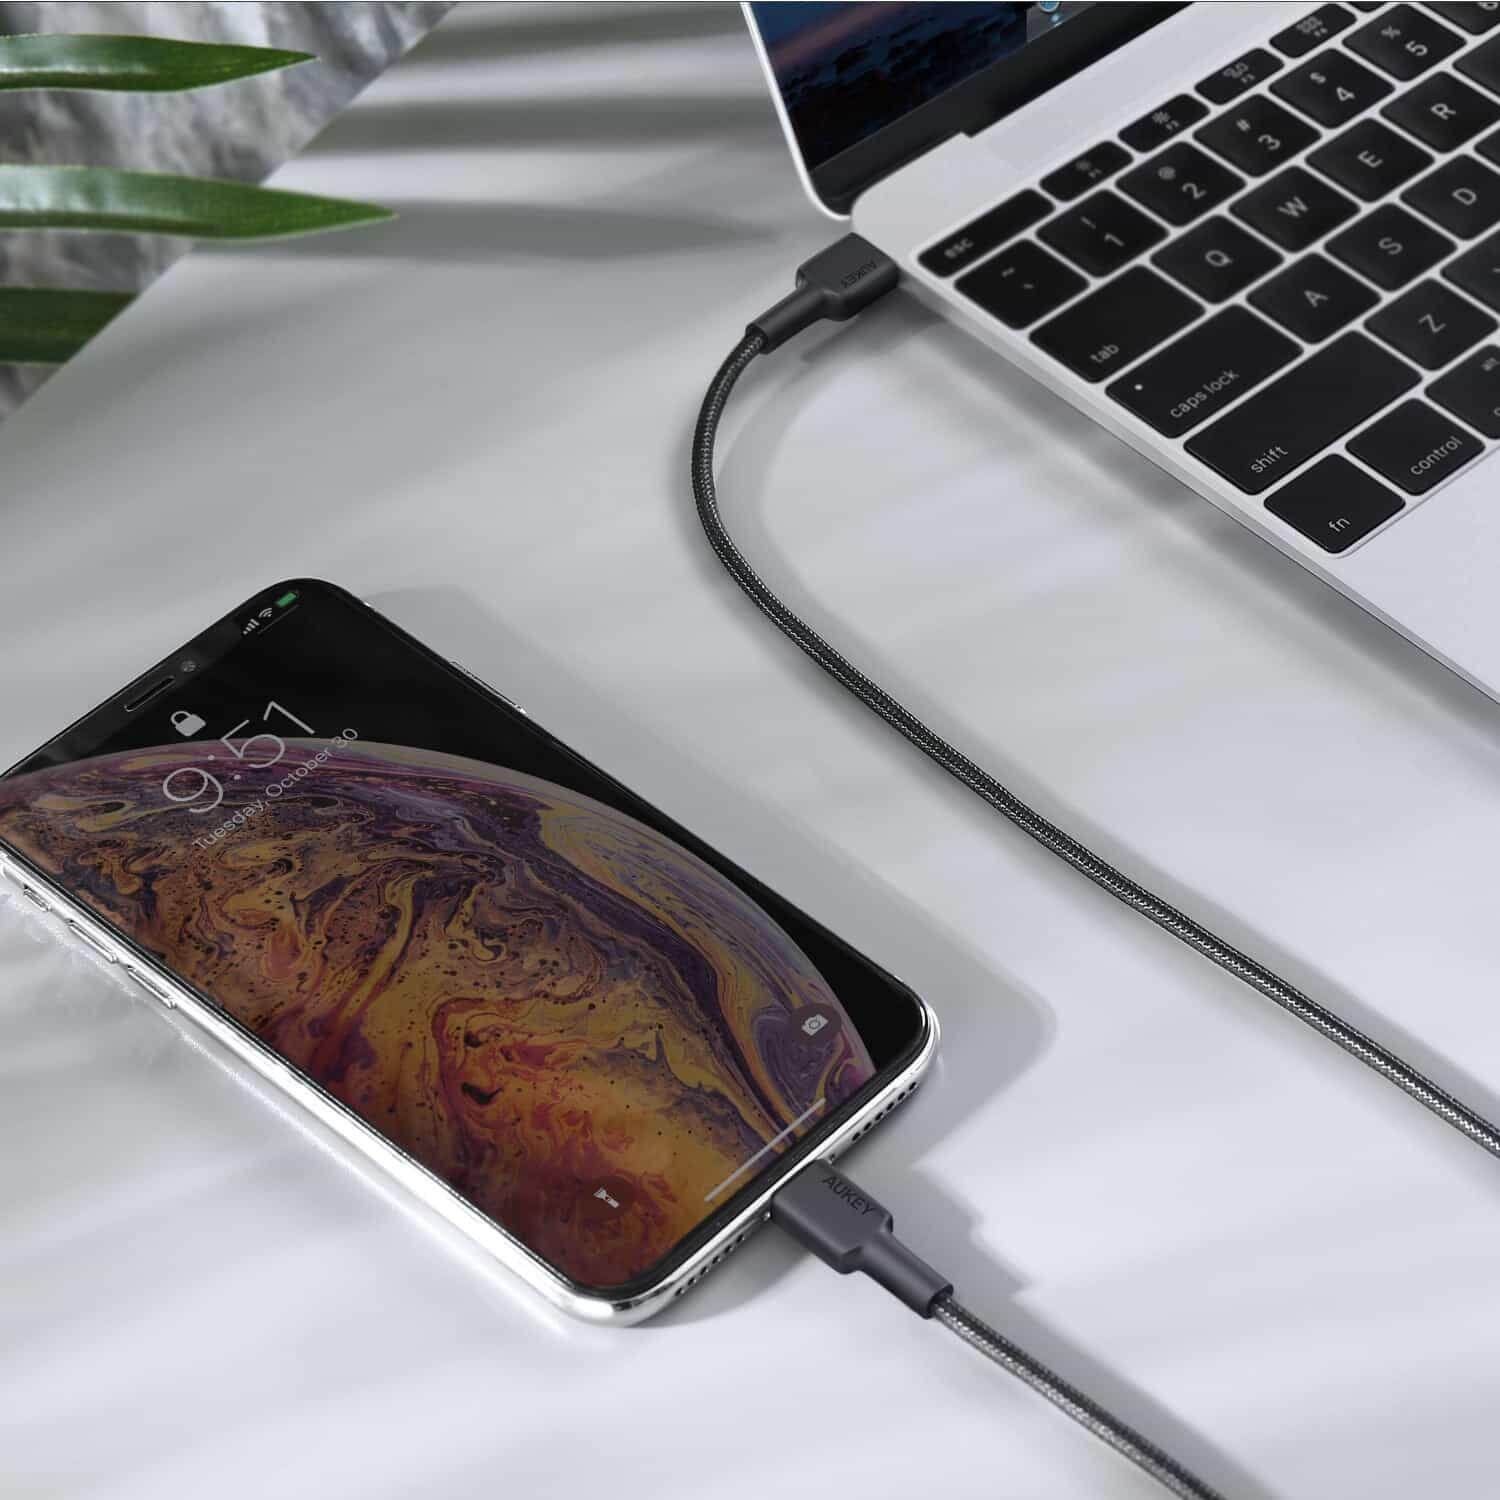 Aukey CB-CL1 MFI Braided Nylon USB C To Lightning Cable PD Fast Charging For For iPhone 12 / 12 Pro / 12 Mini / 11 / X / X Pro / 8